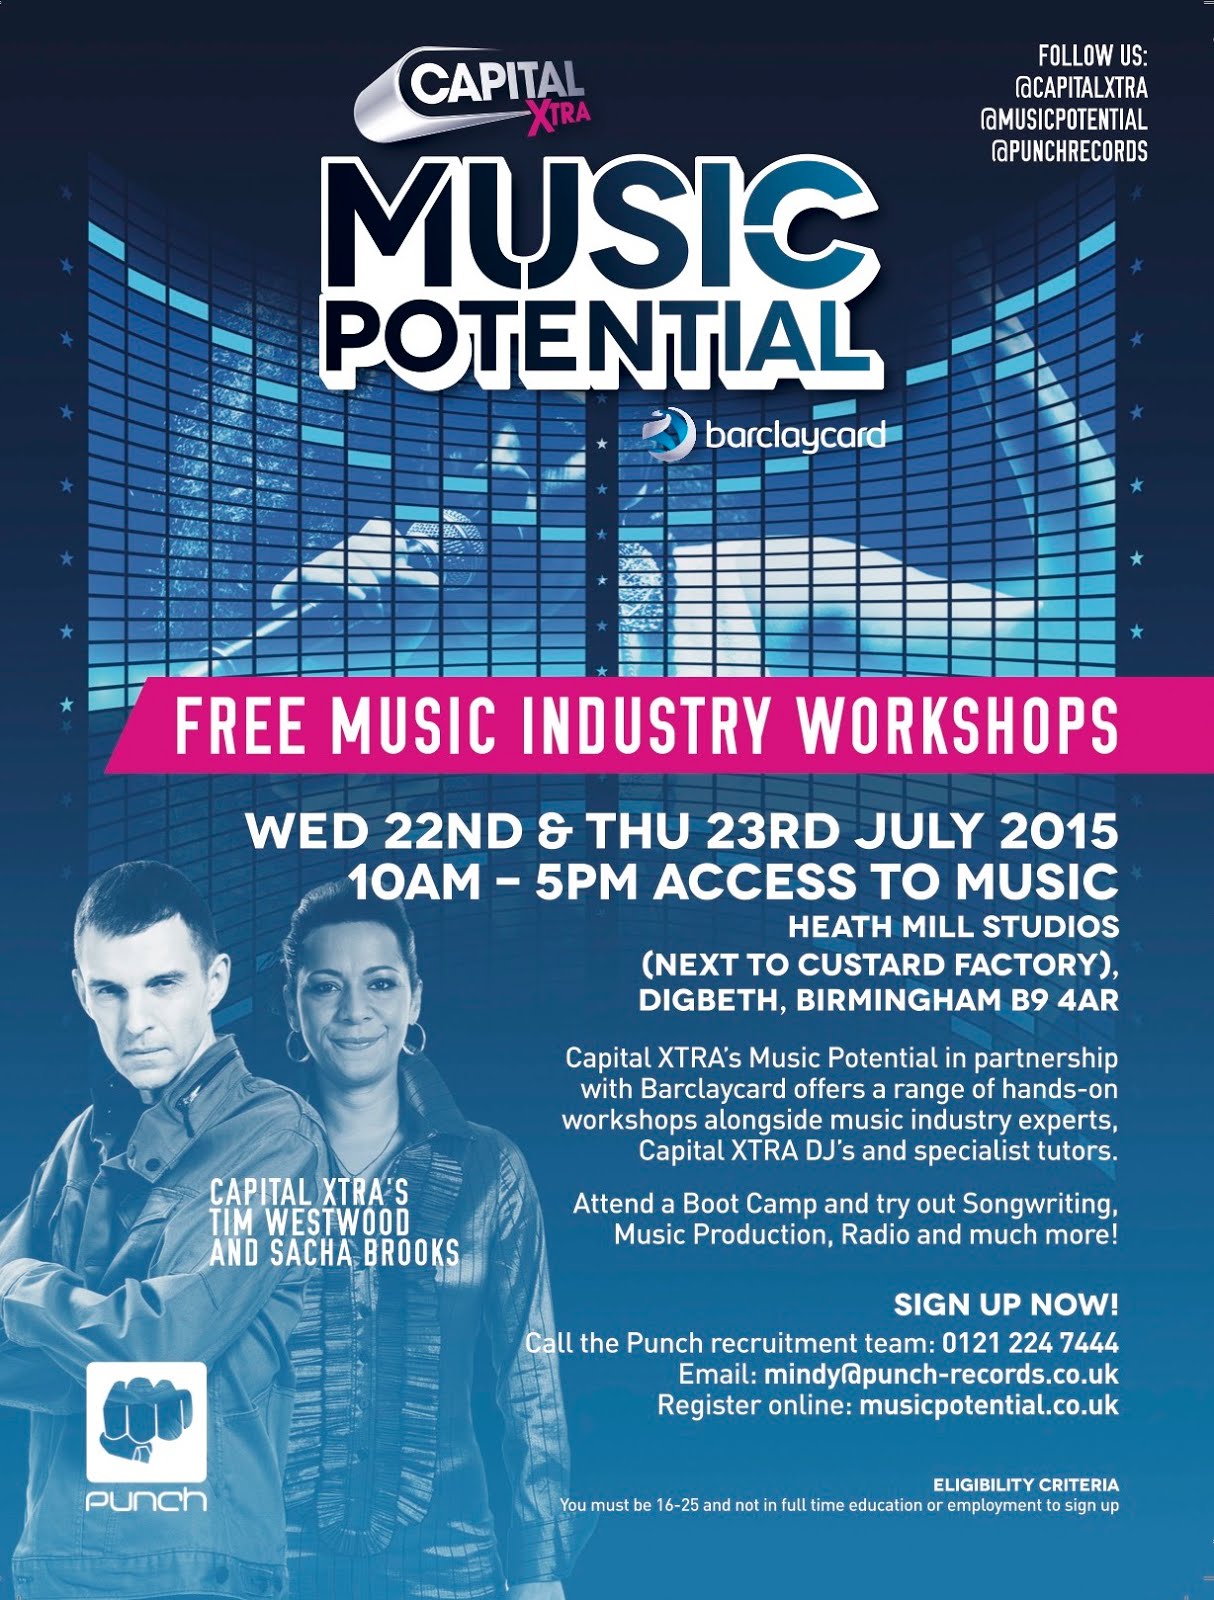 MUSIC POTENTIAL COURSE (CLICK IMAGE TO FIND OUT MORE)